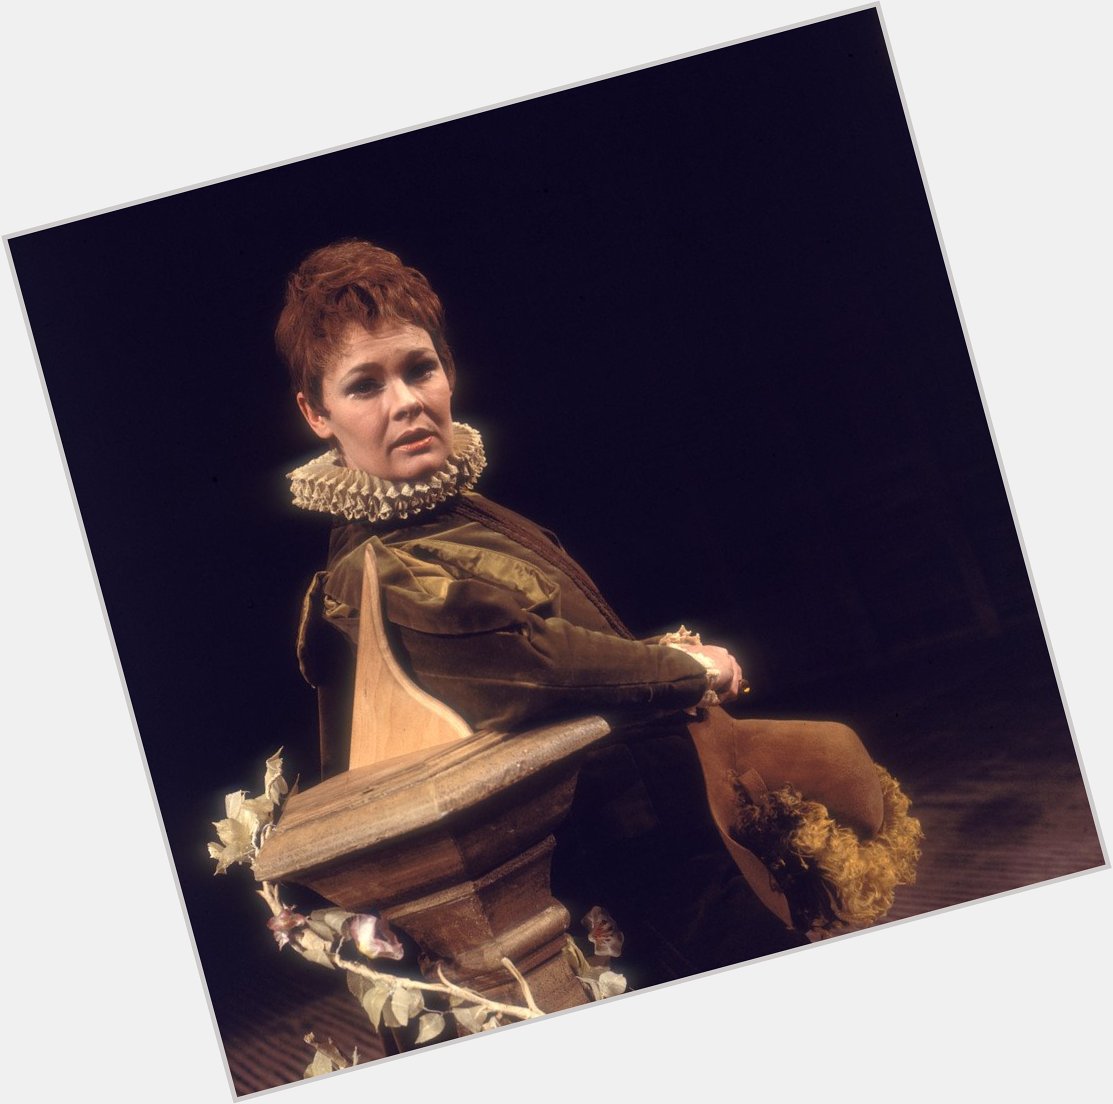 Happy Birthday Dame Judi Dench! Here she is on our stage in 1969 and 2006. Which of her performances have you seen? 